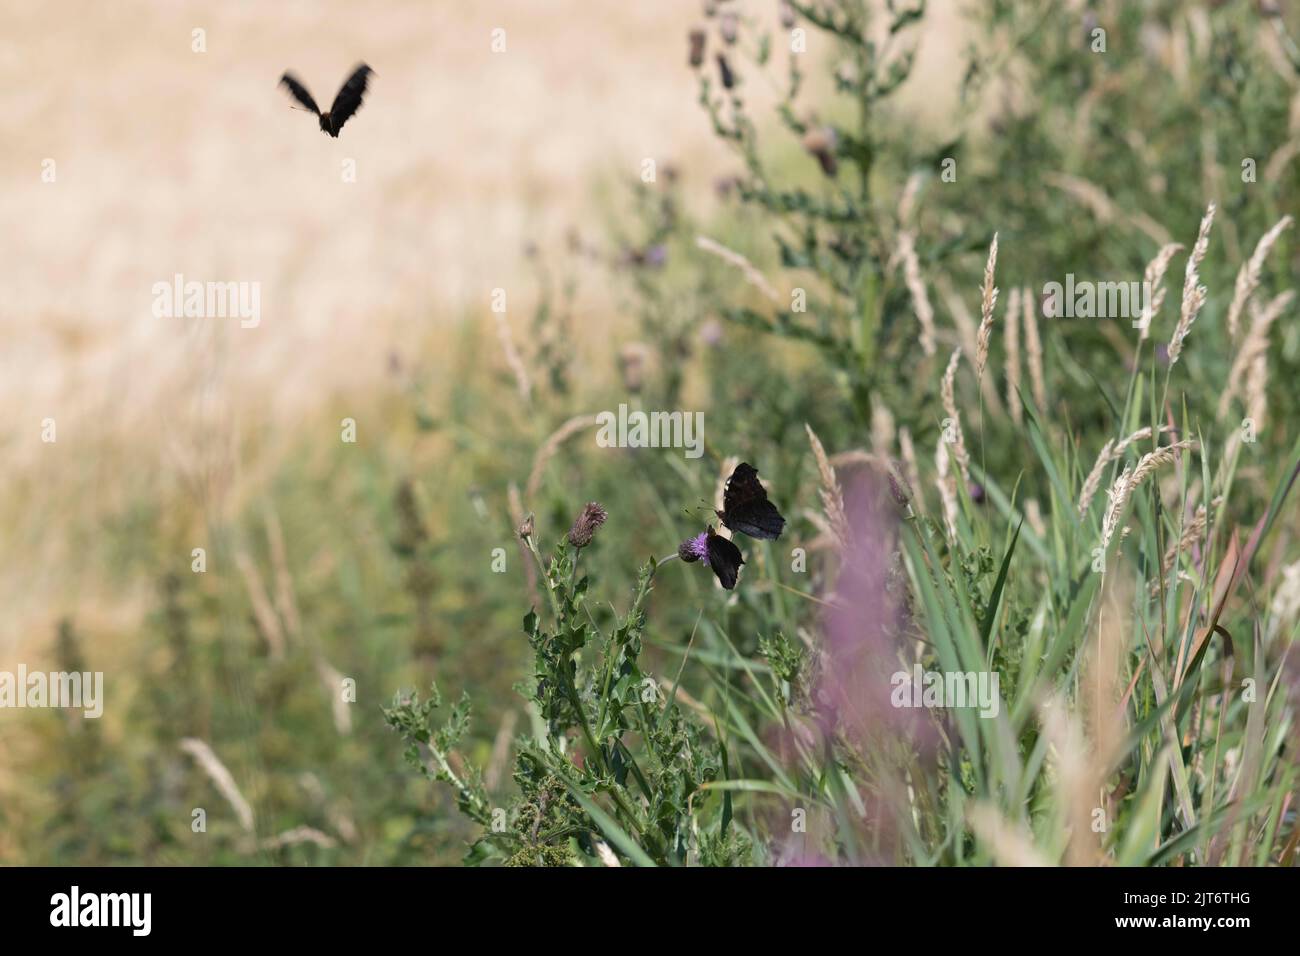 Peacock Butterflies (Inachis Io) in Flight and on Creeping Thistles (Cirsium Arvense) in an Area of Wild Flowers in the Margin of a Field of Barley Stock Photo